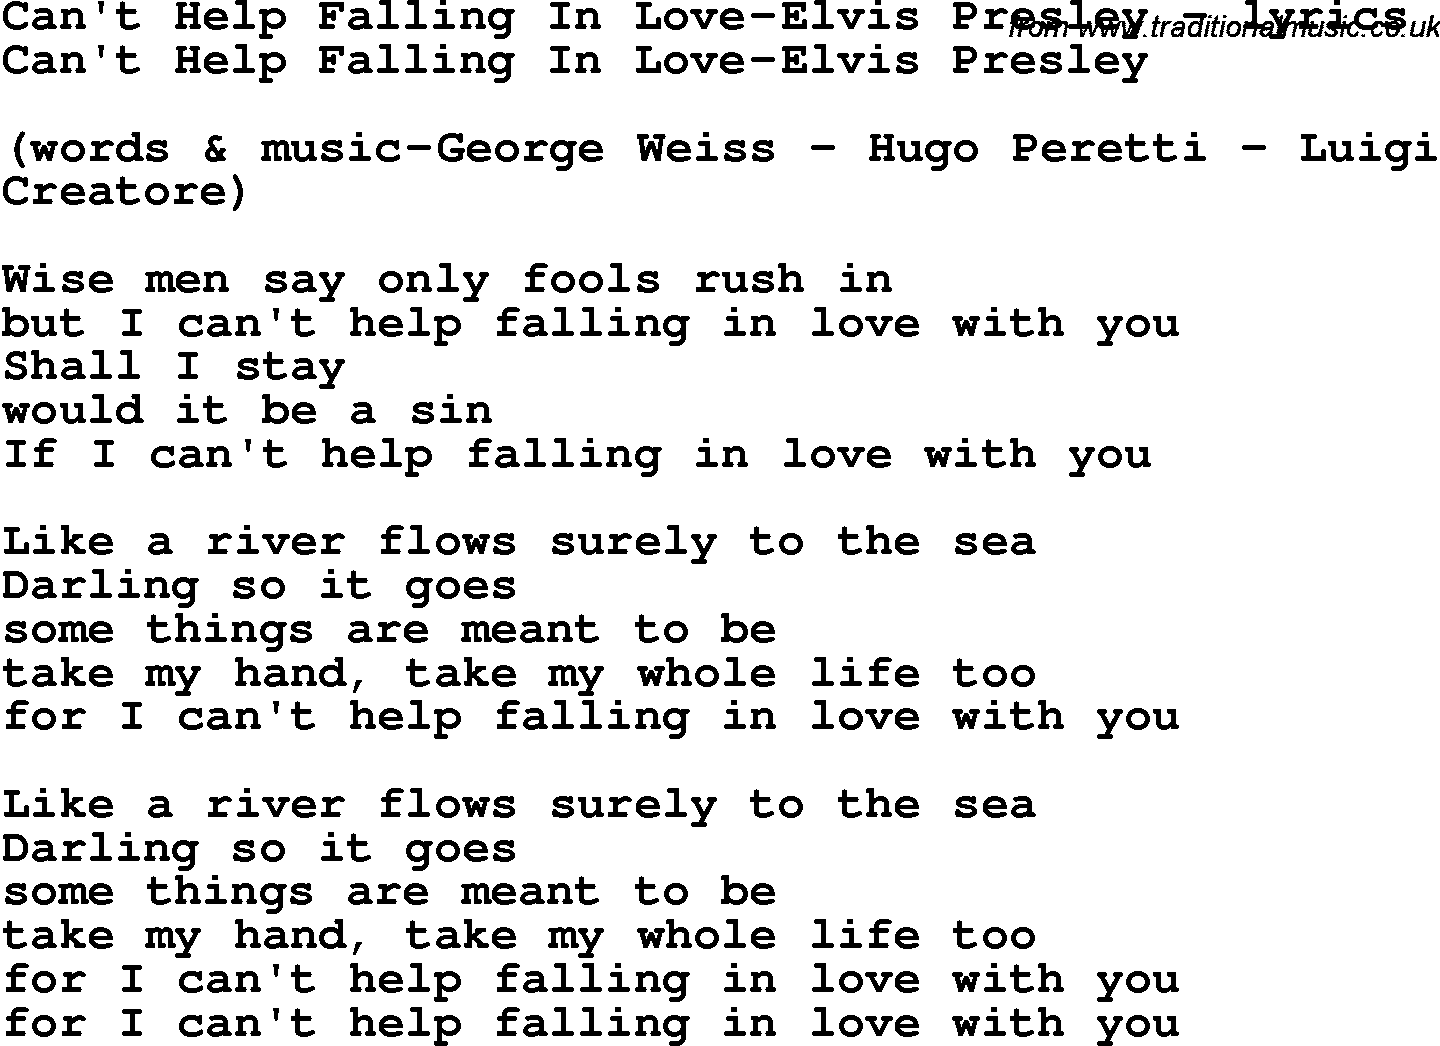 Love Song Lyrics for: Can't Help Falling In Love-Elvis Presley